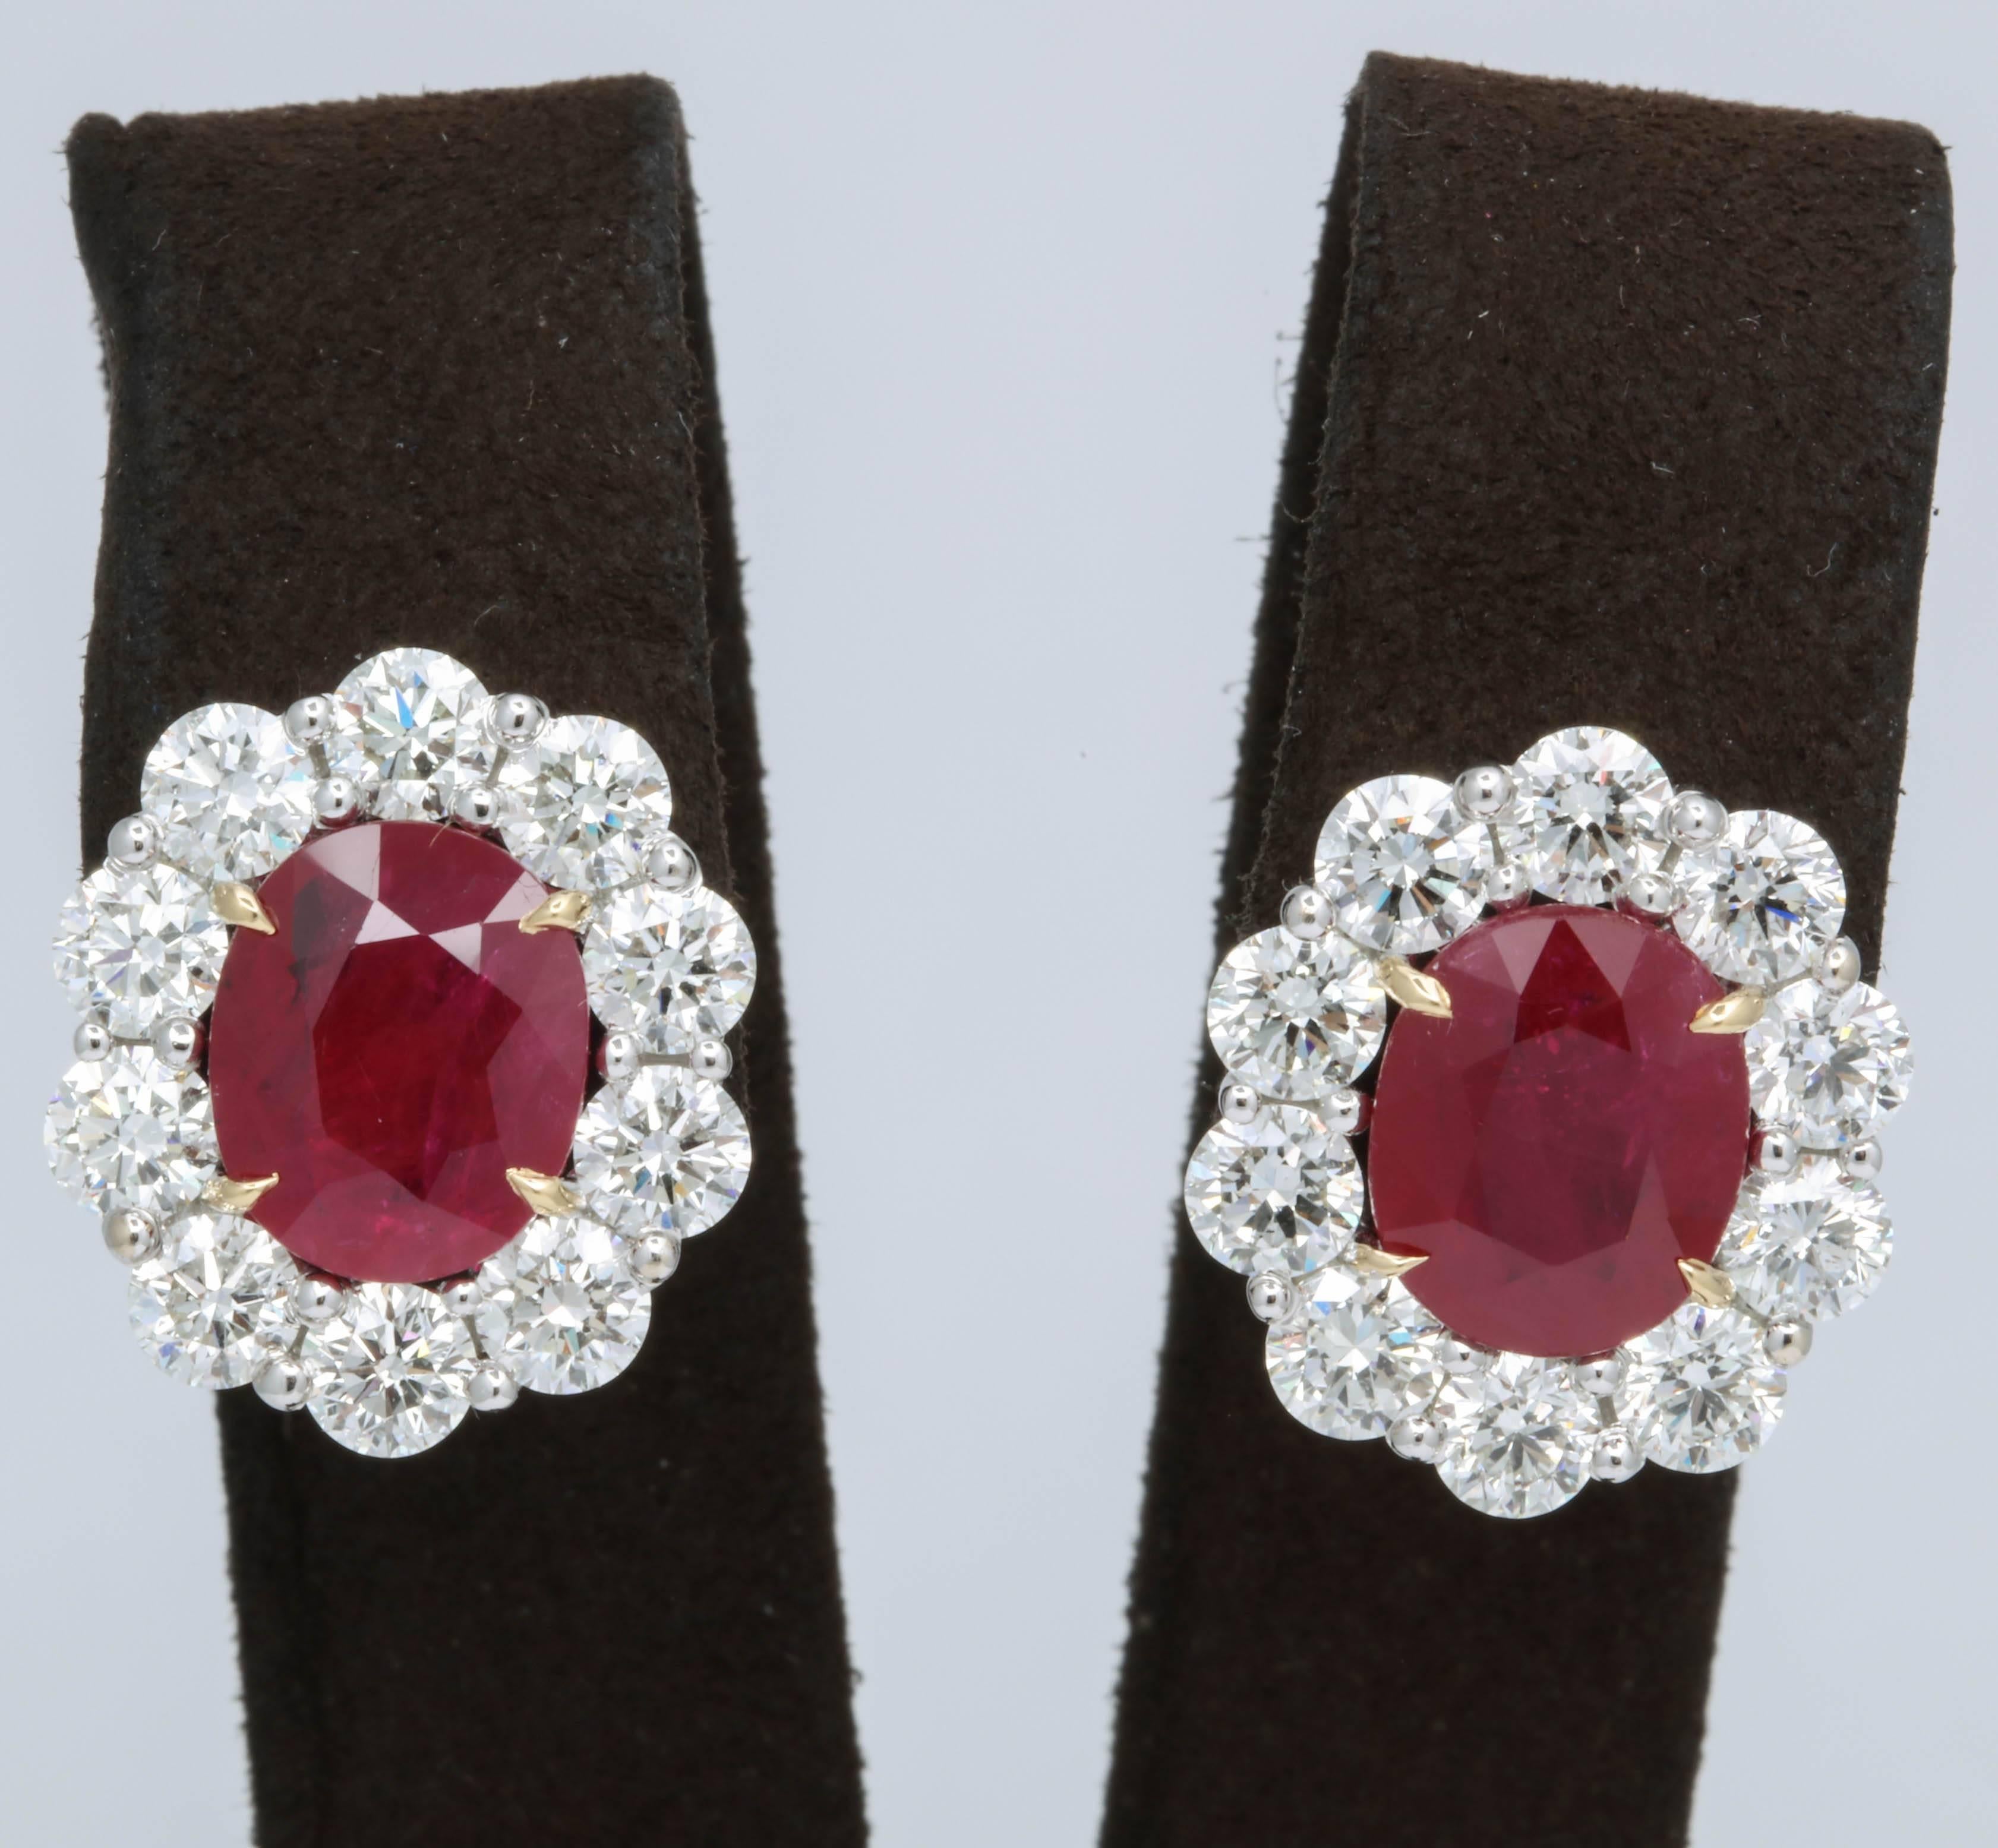 
Stunning Ruby and Diamond Earrings!

8.44 carats of intense red ruby

5.58 carats of white round brilliant cut diamonds

18k gold 

Approximately .75 inches long and .65 inches wide. 

An important looking but wearable ruby and diamond earring.